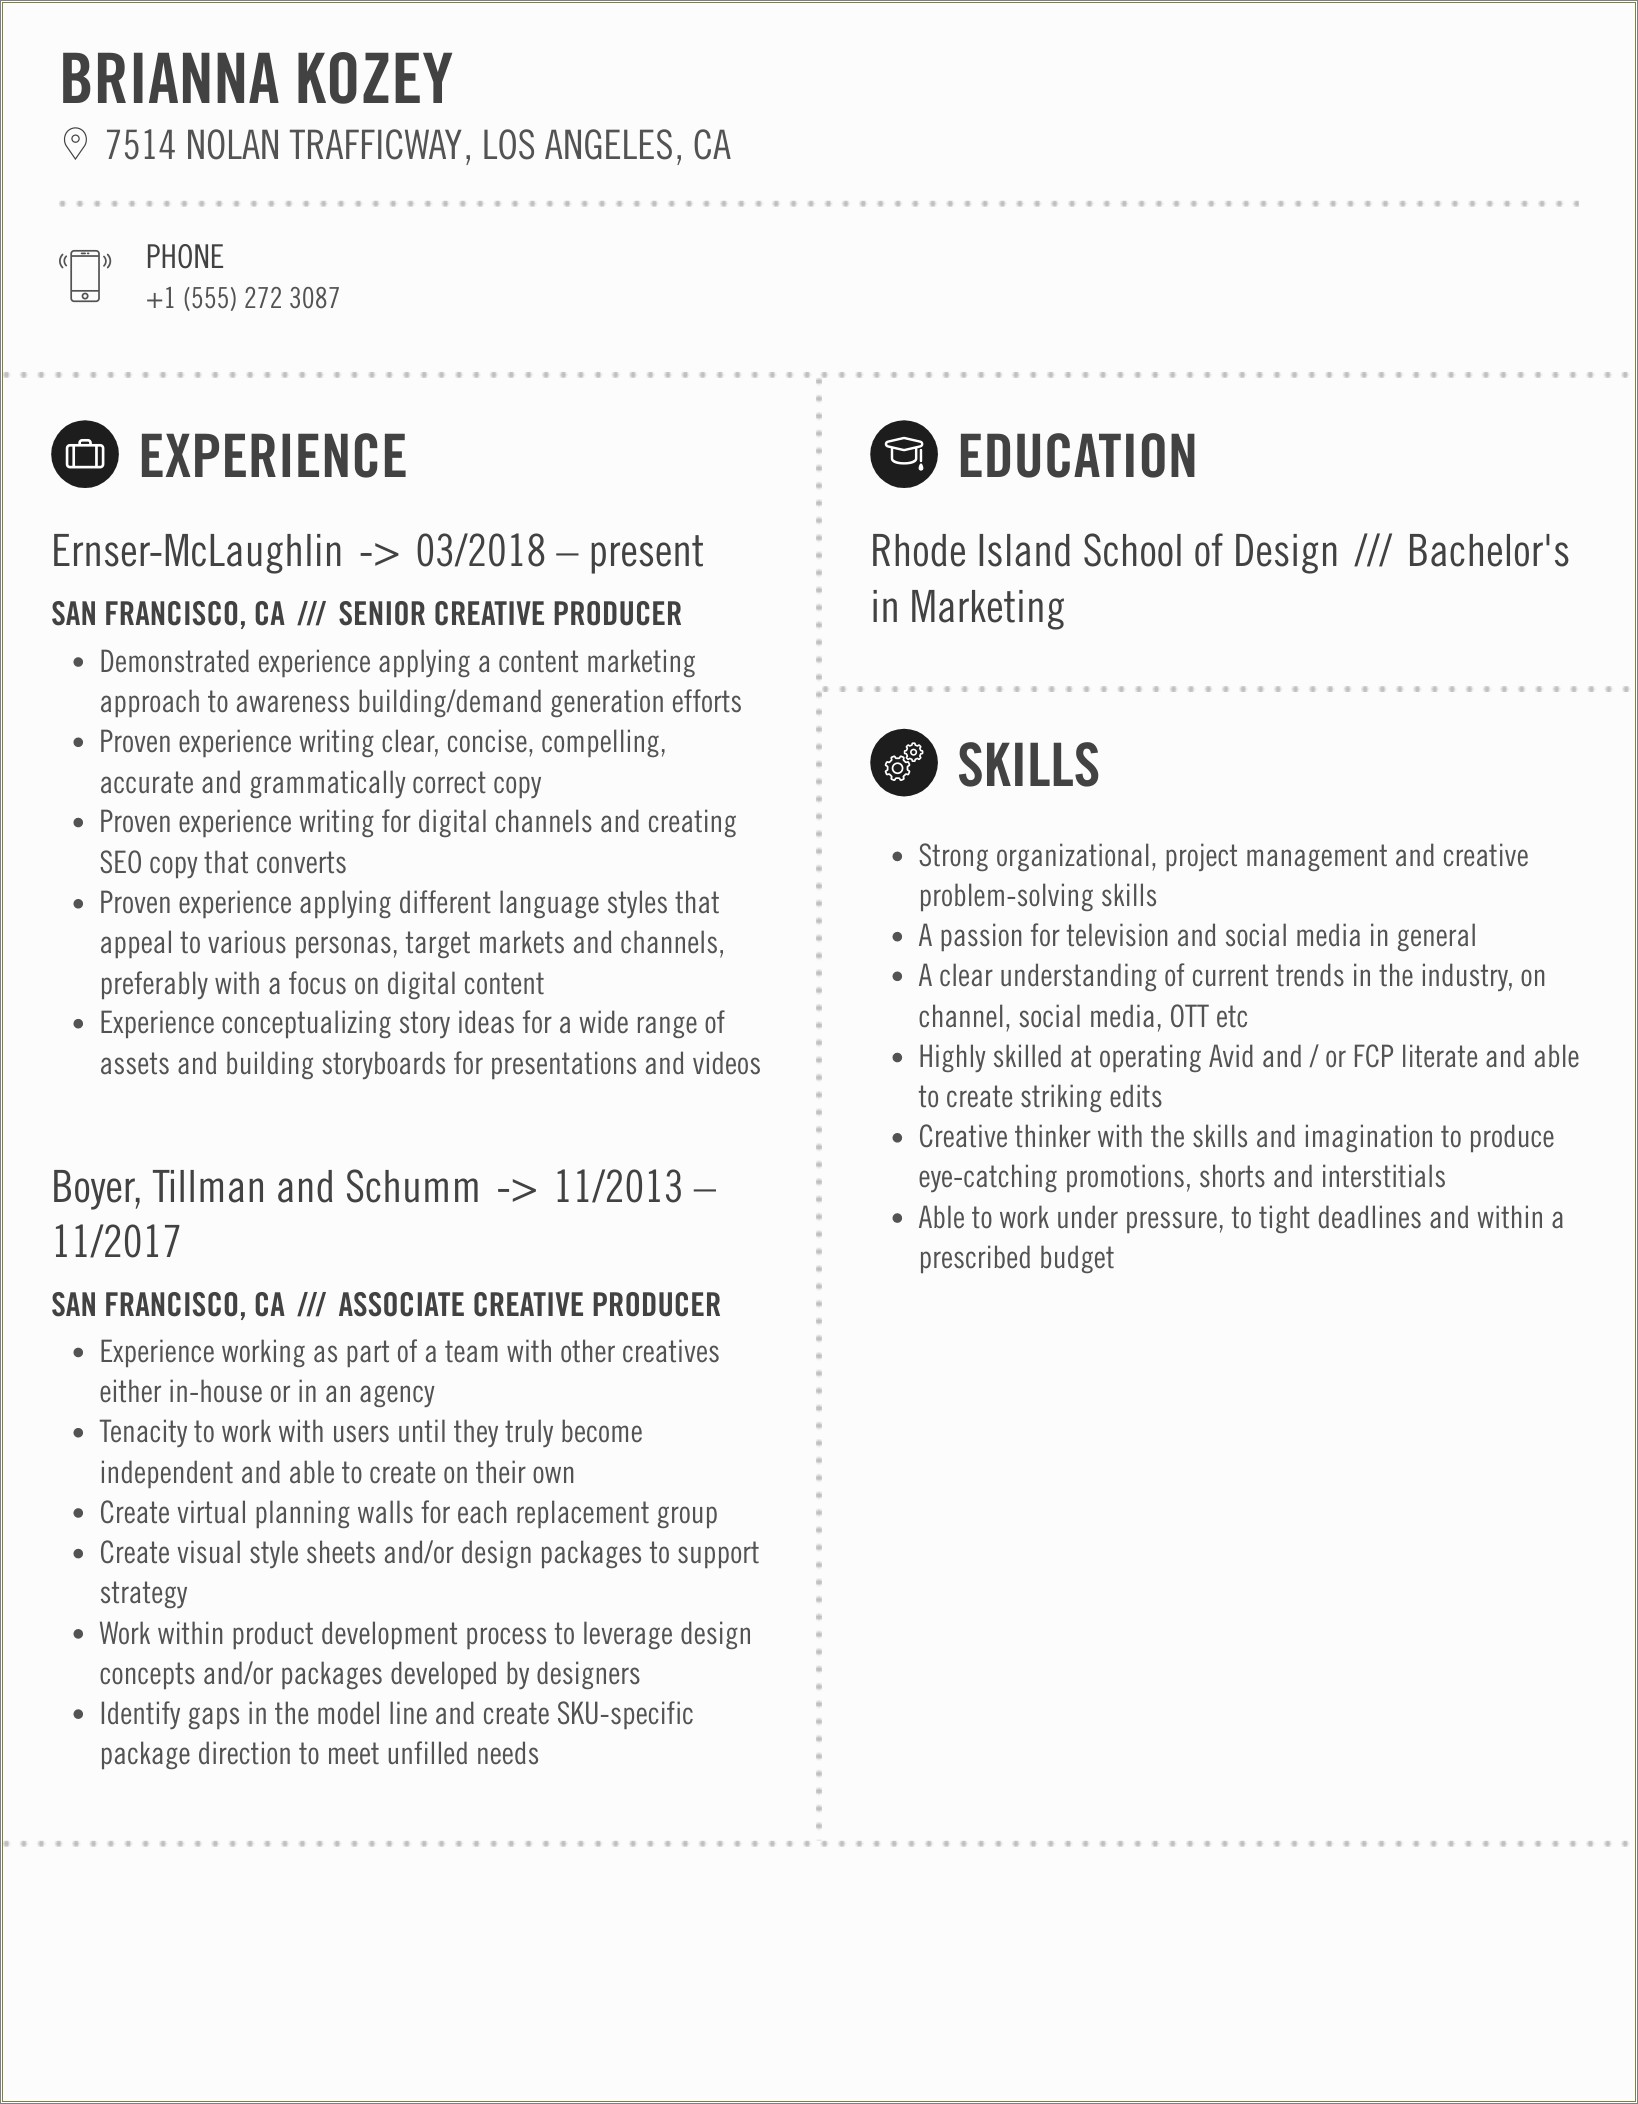 Free Resume Template Creative Producer